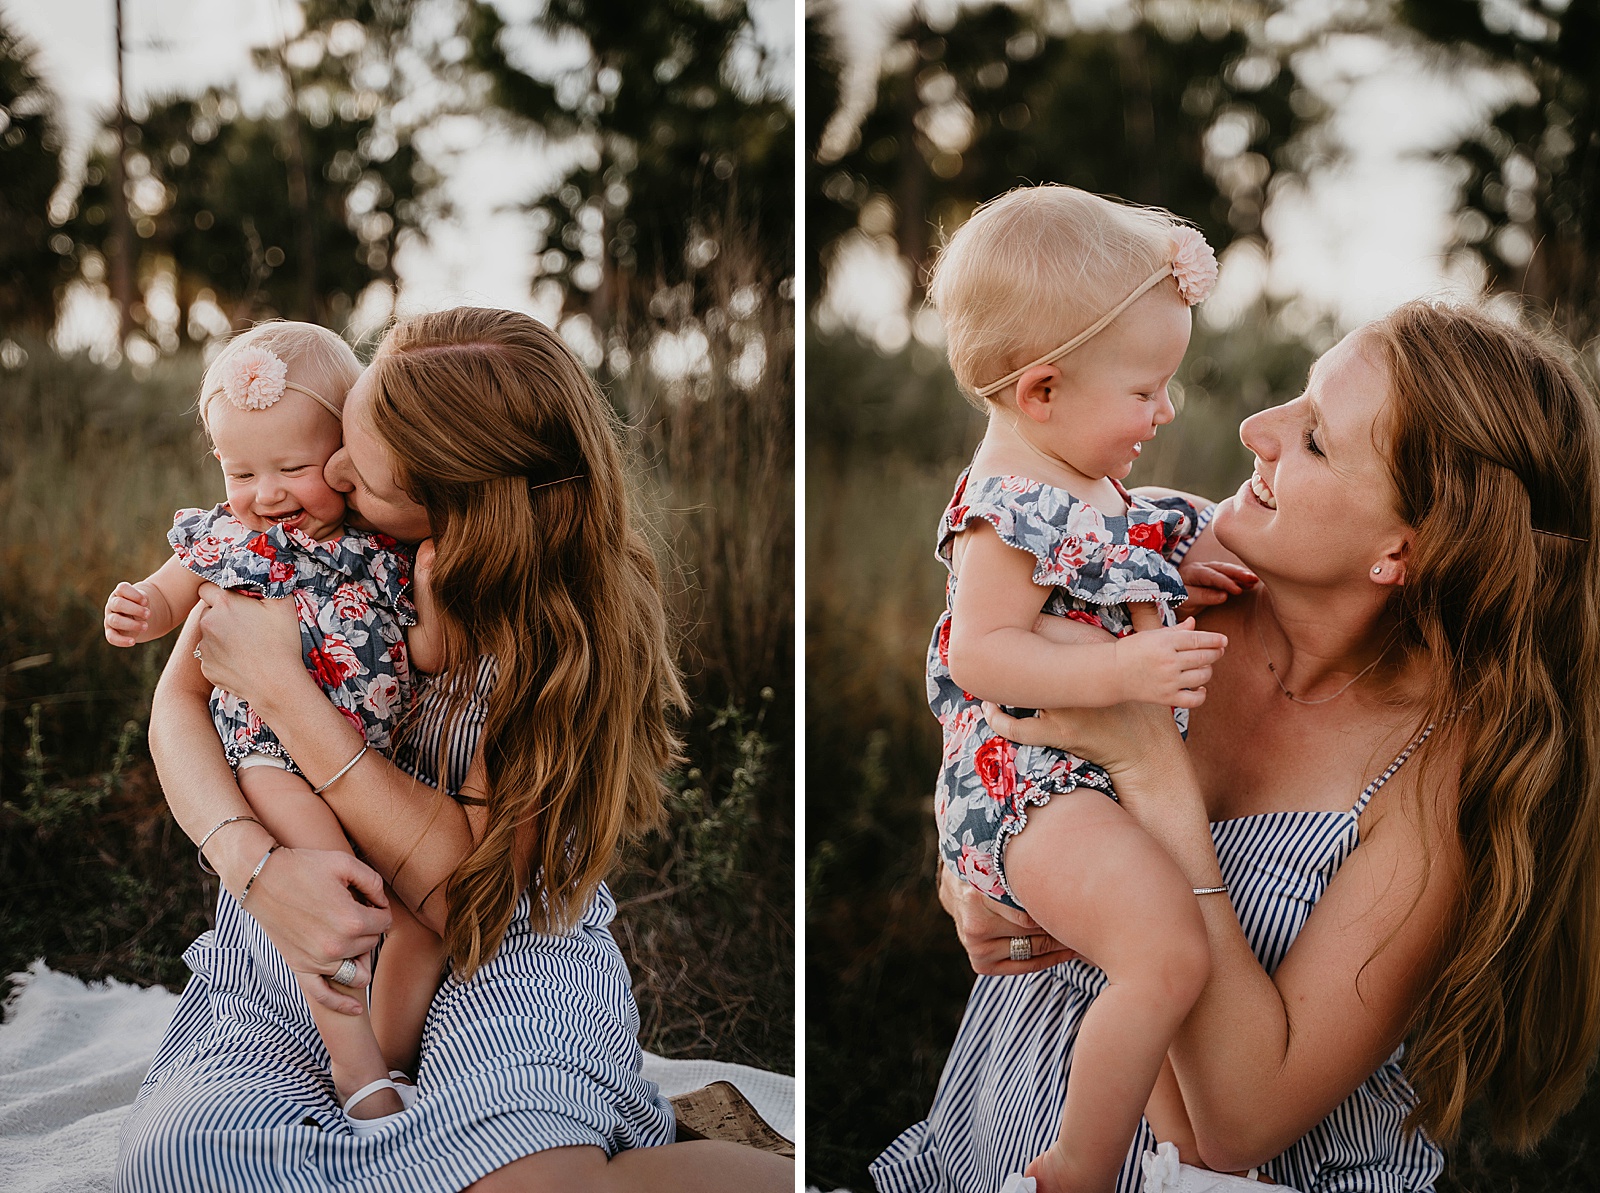 Royal Palm Beach Family Session captured by South Florida Lifestyle Photographer, Krystal Capone Photography.